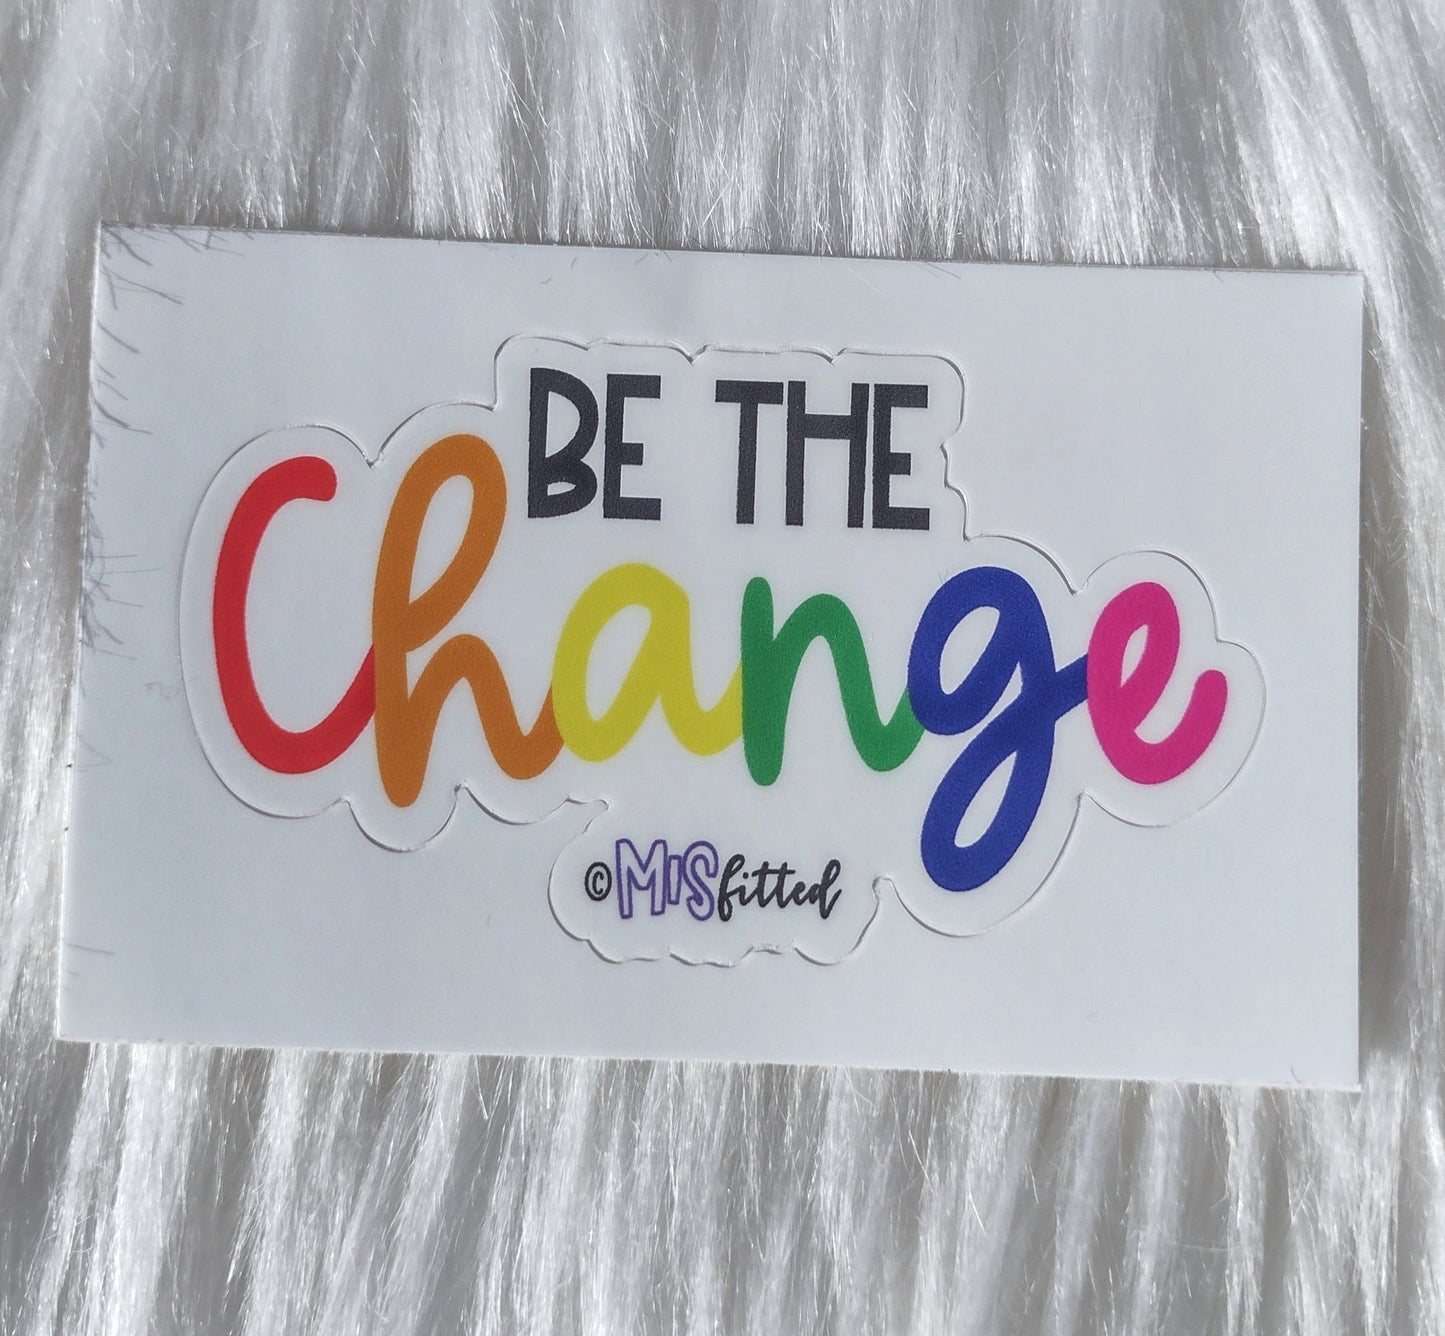 Be The Change Sticker